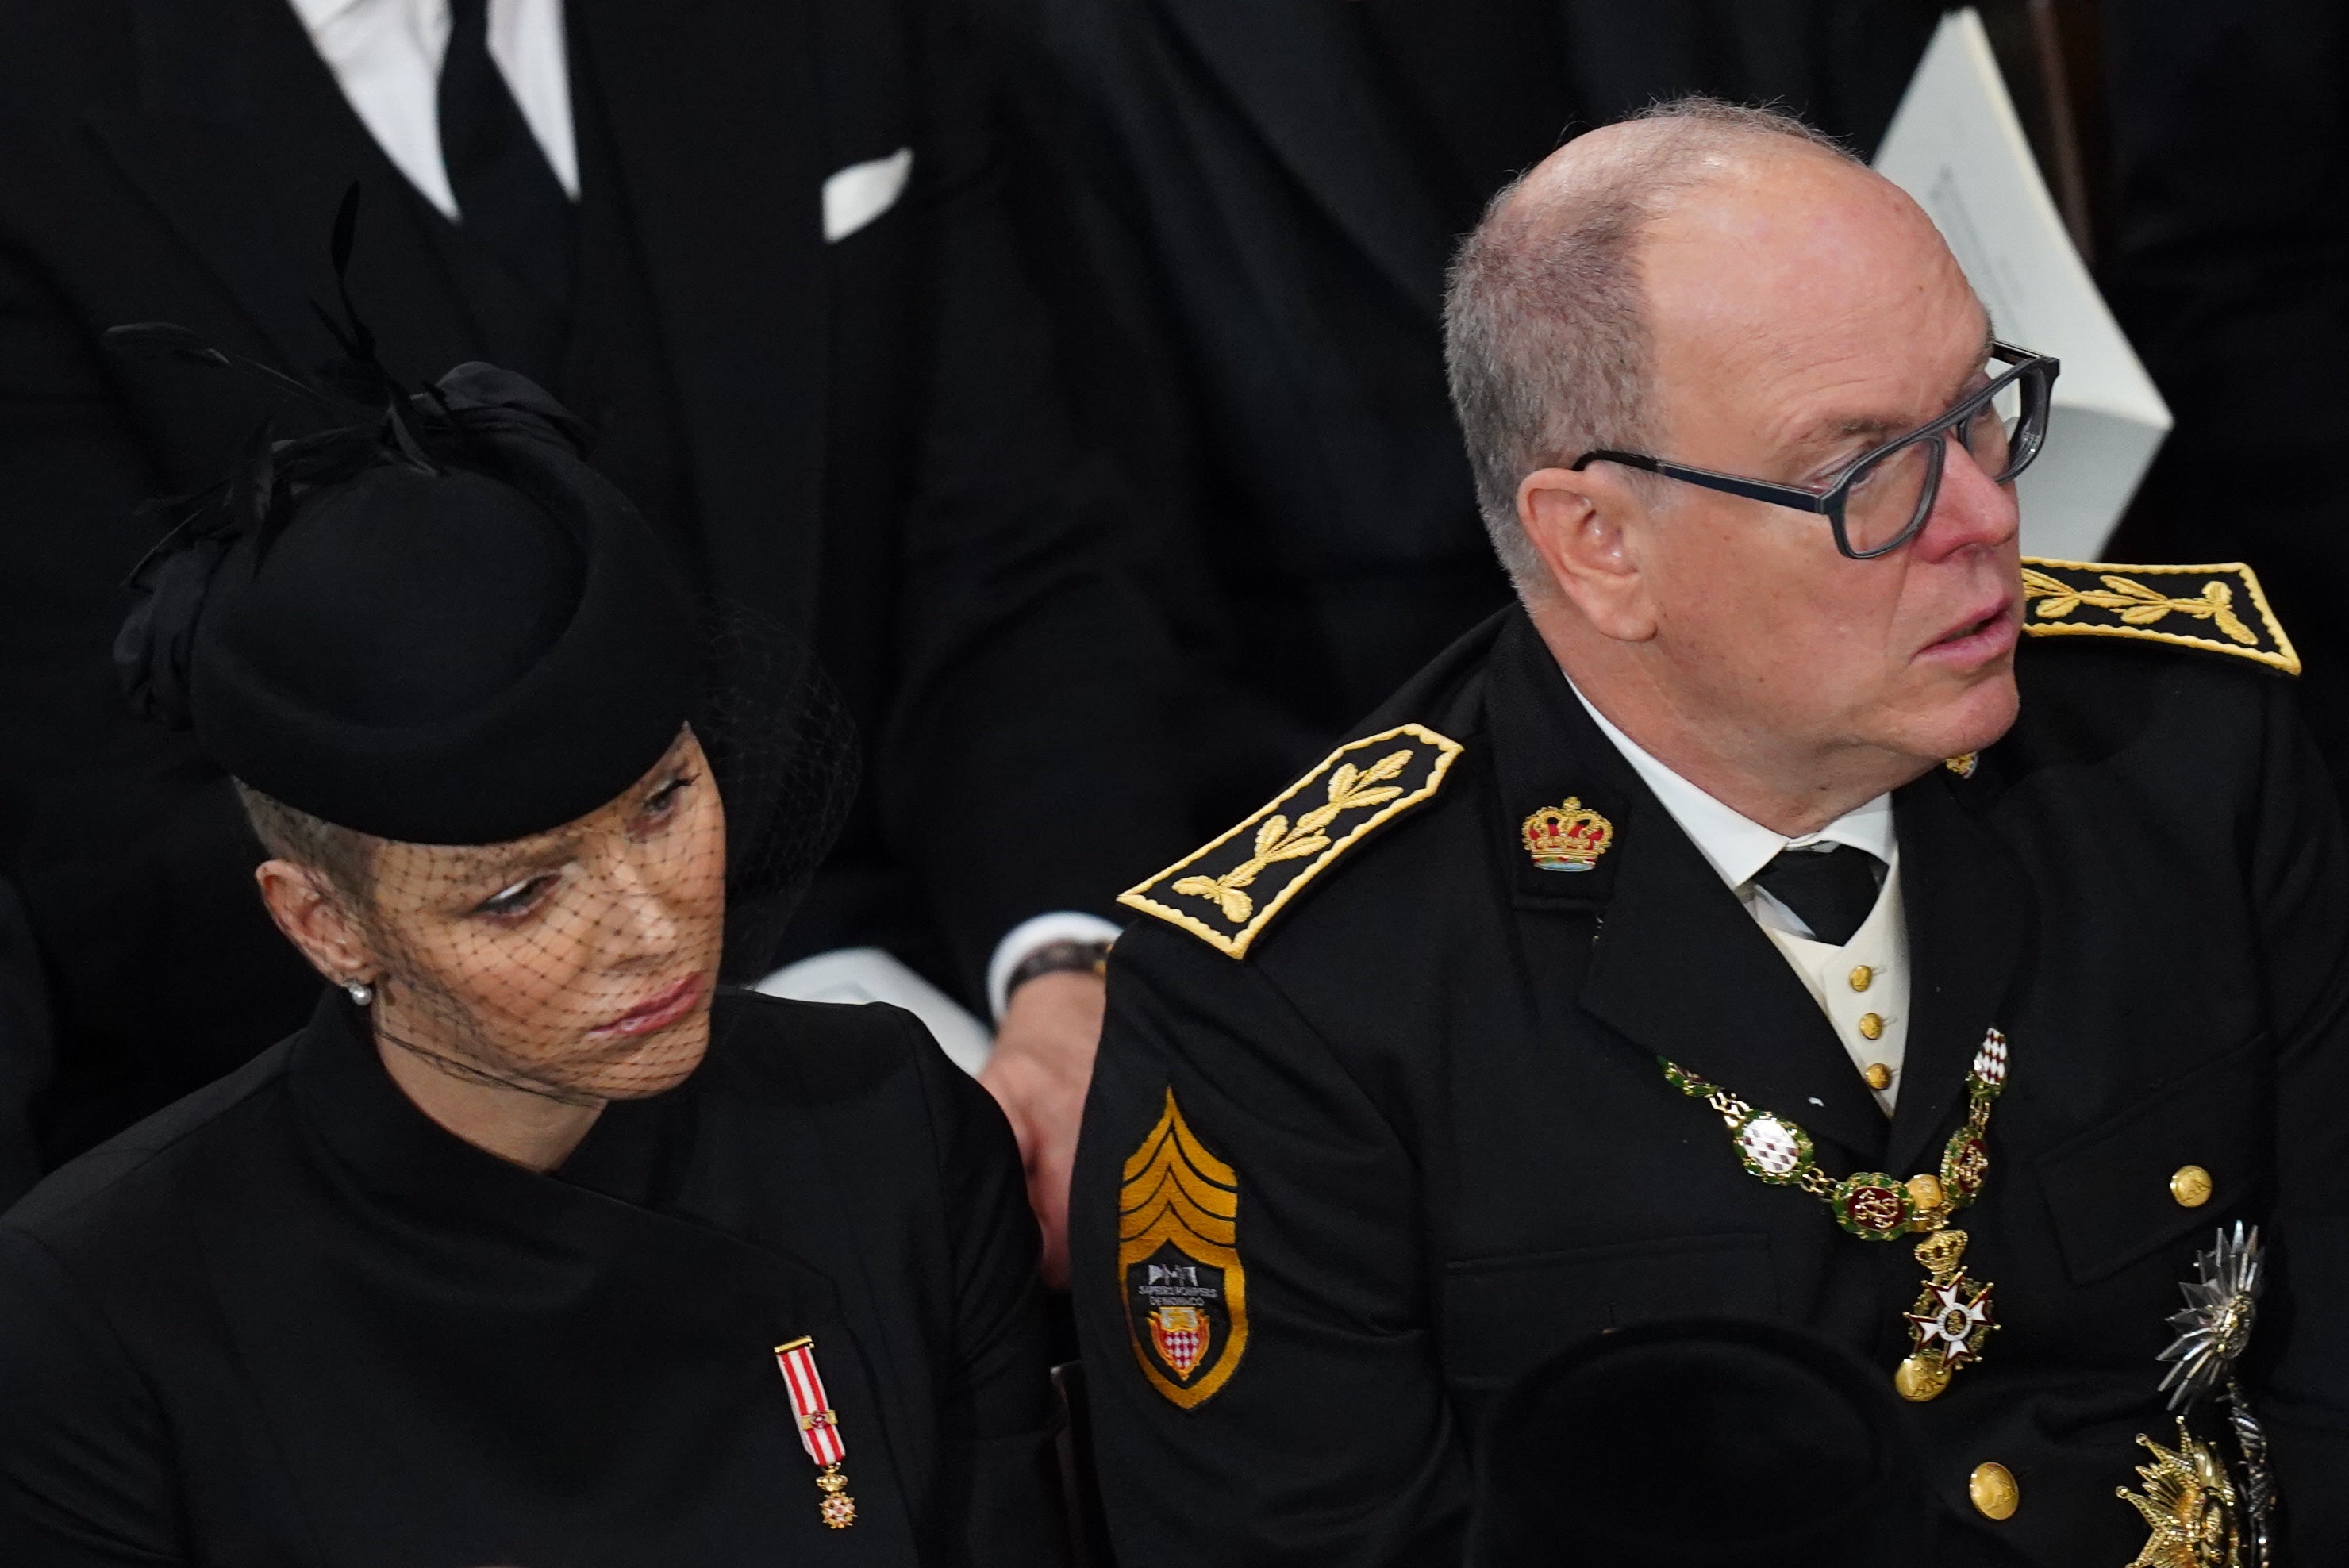 Prince Albert II and Princess Charlene of Monaco attended the state funeral of Queen Elizabeth II in September 2022